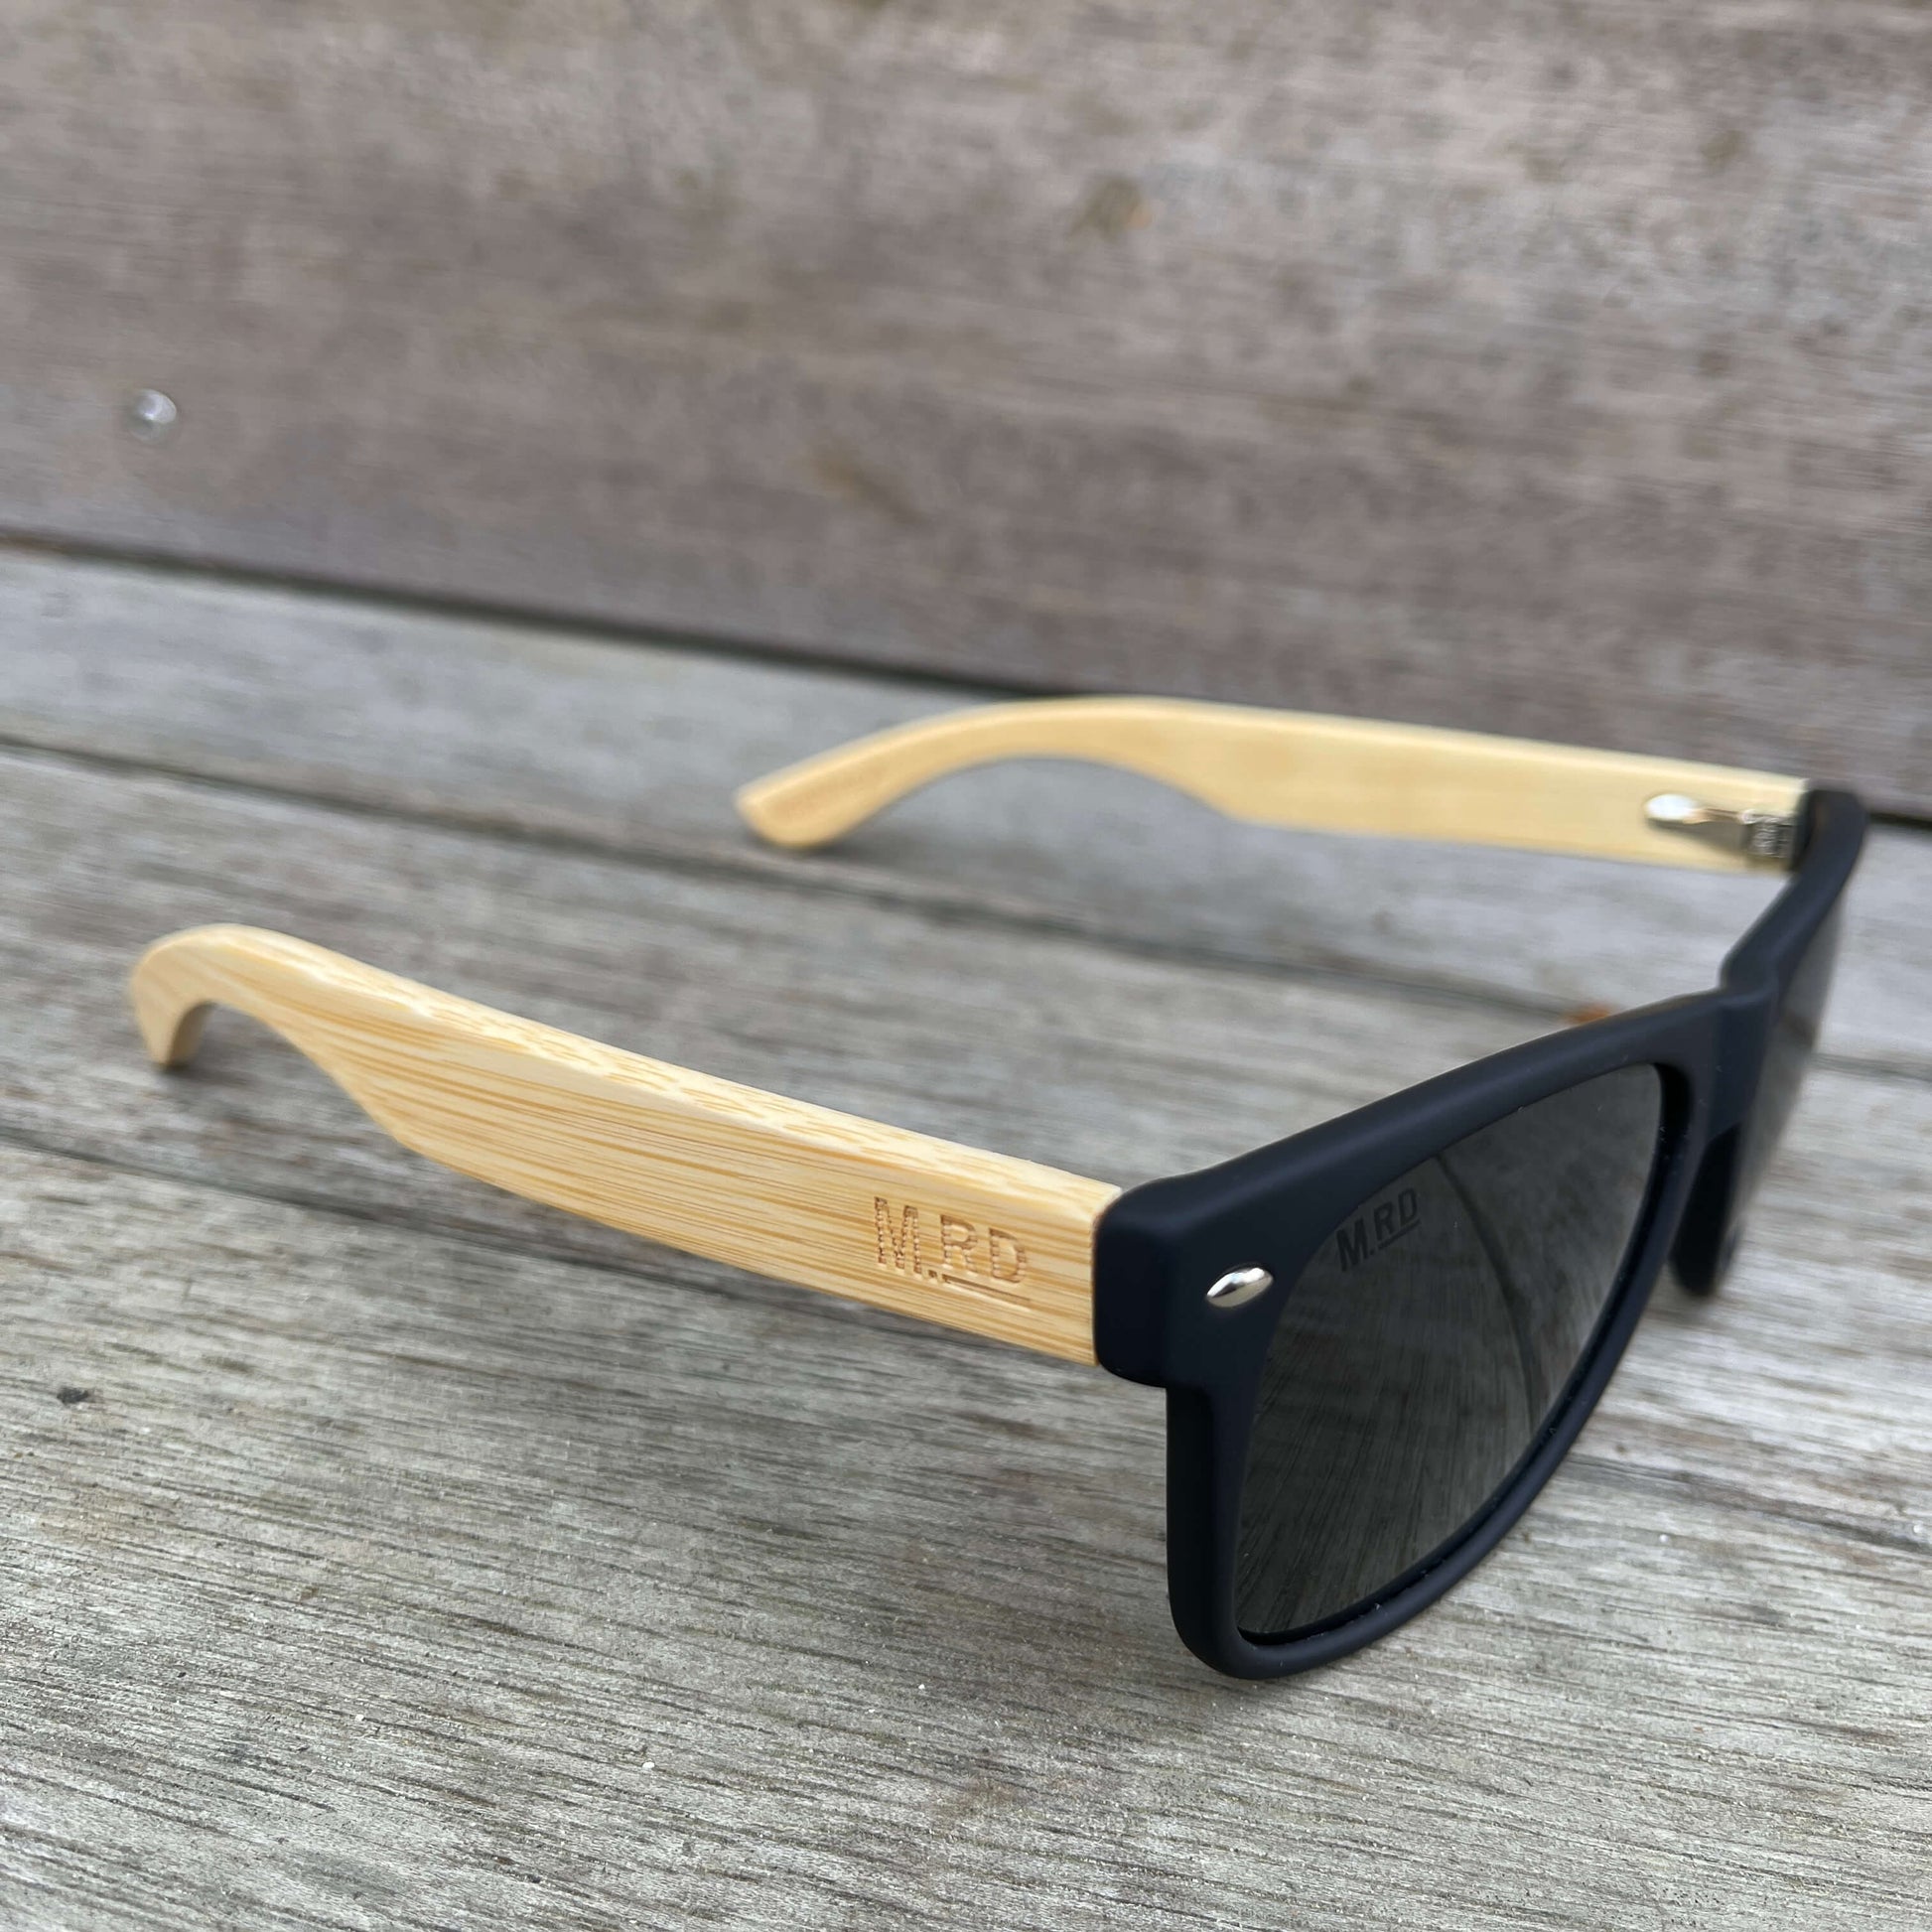 Sunglasses with wooden arms, black frames and dark lenses.